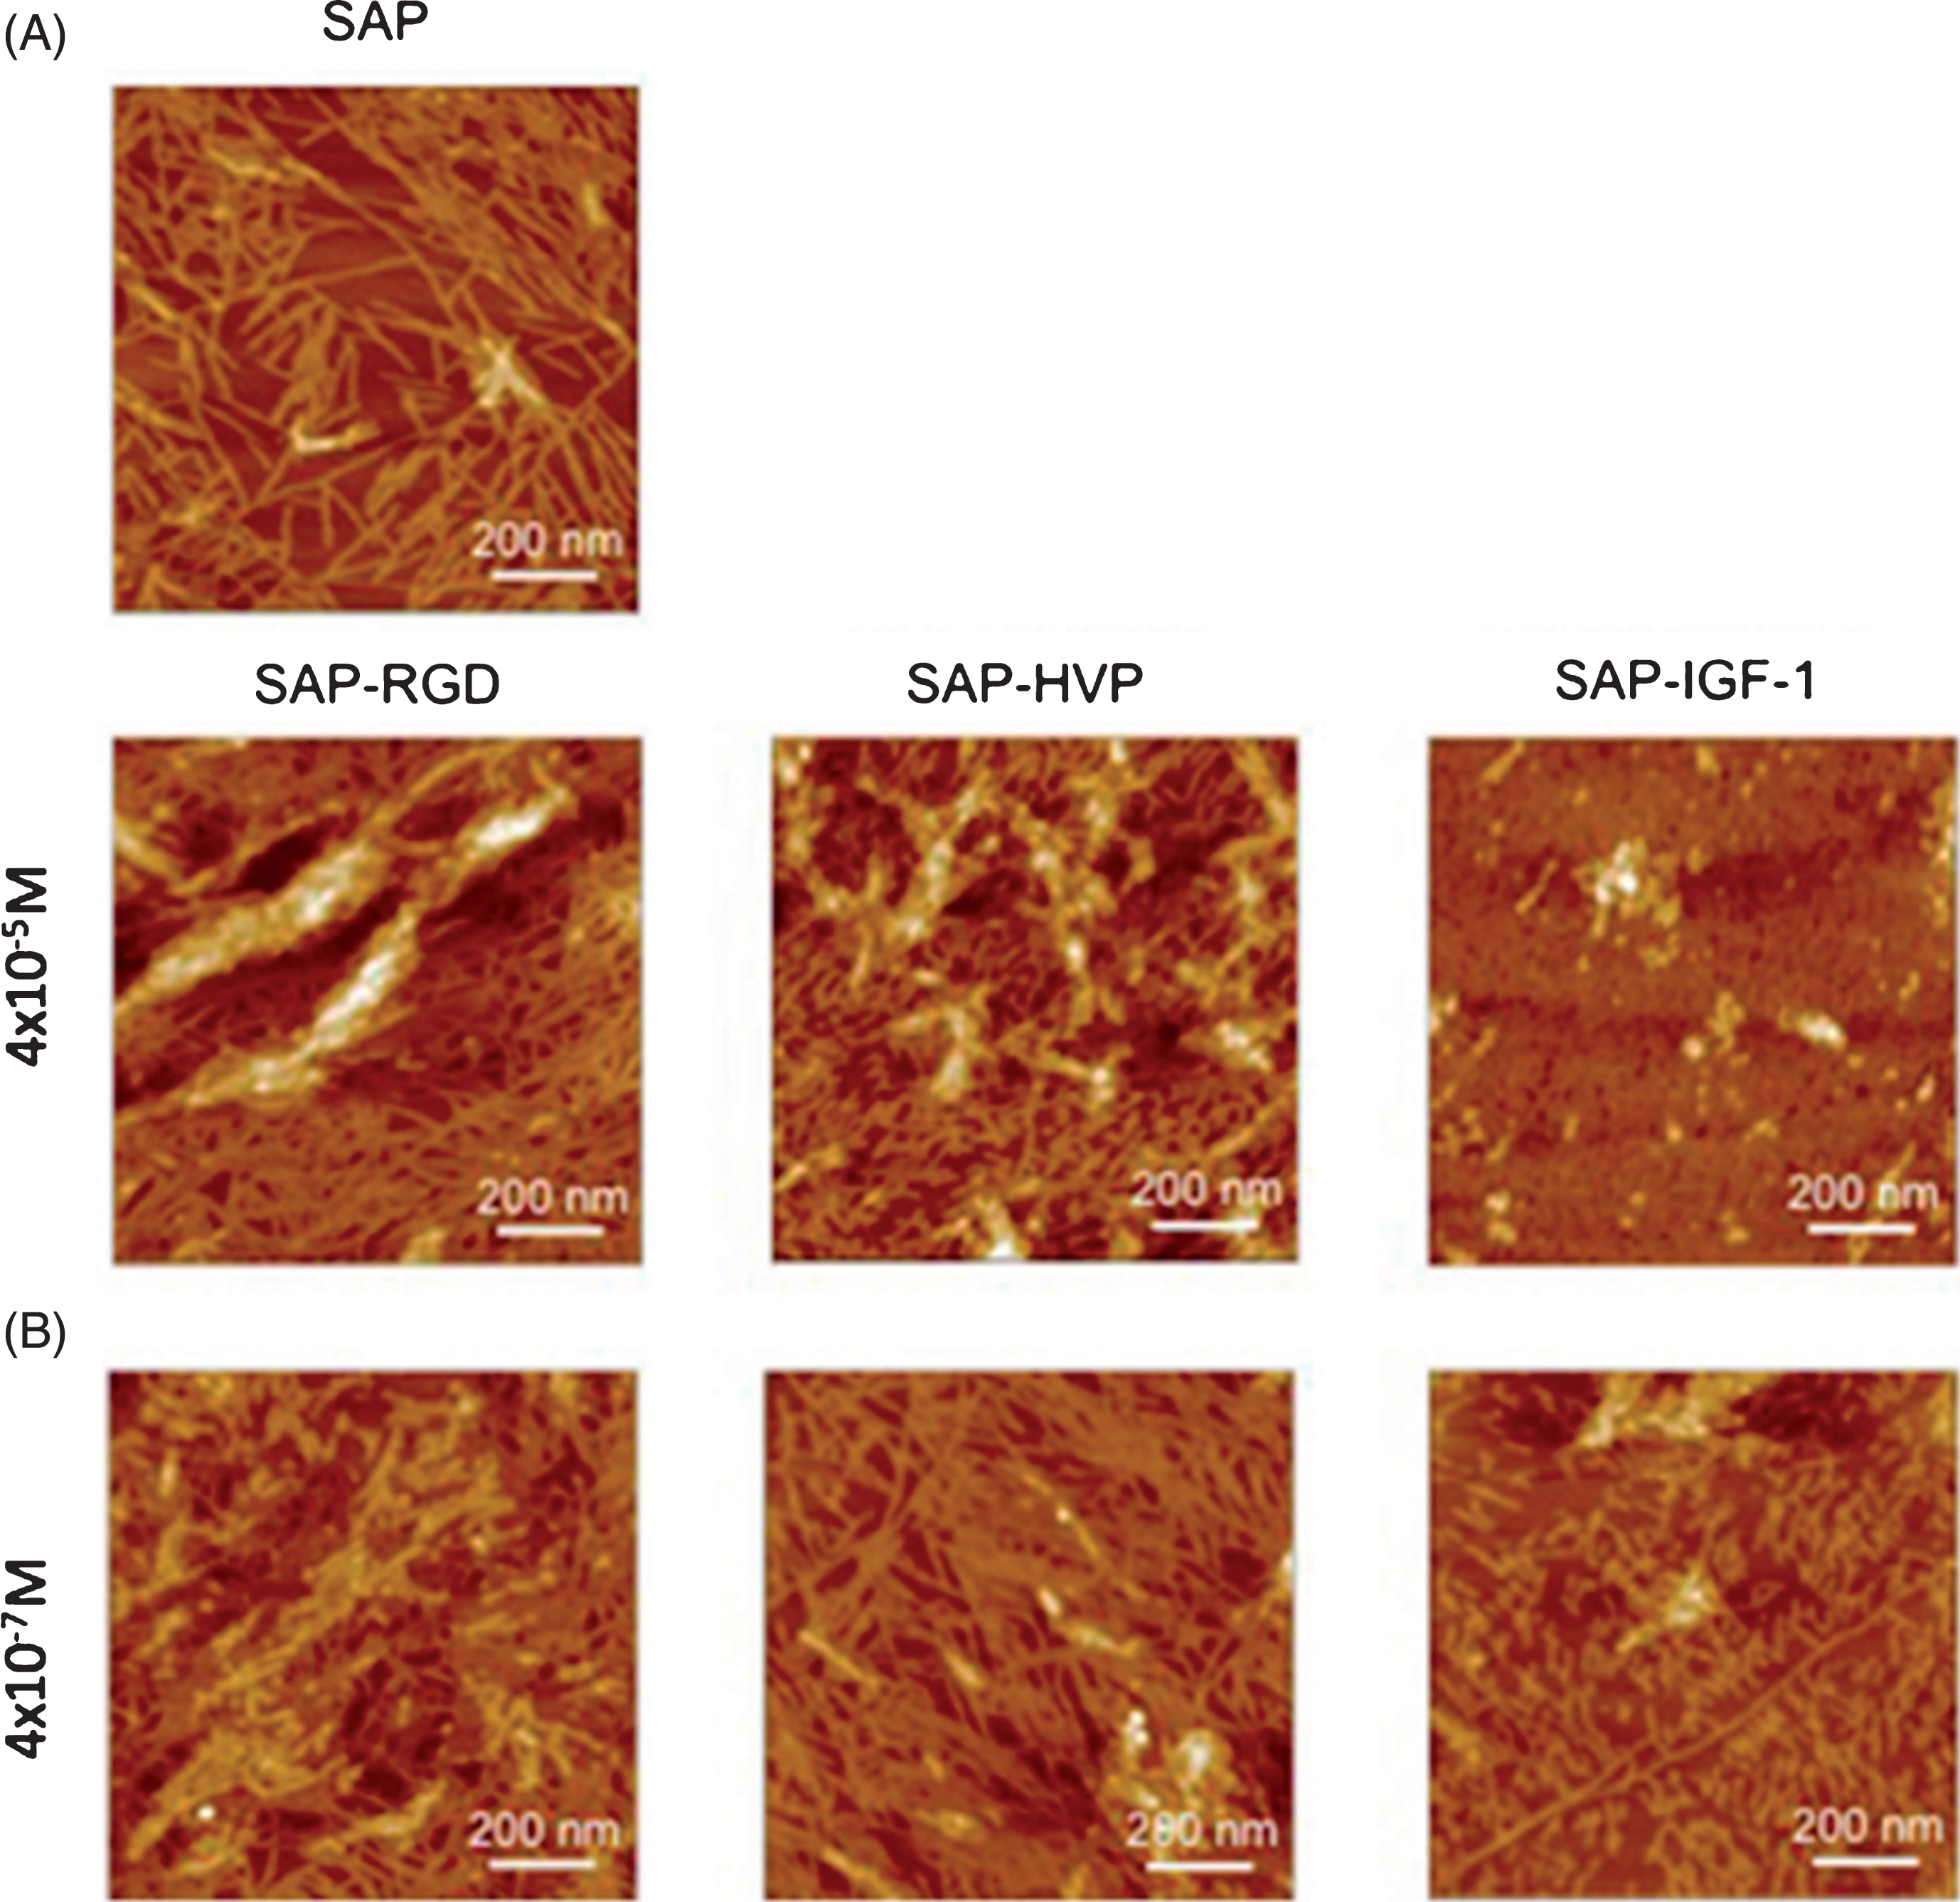 Atomic Force Microscopy (AFM) images of: A) Self-assembling peptide hydrogel pristine (SAP) or enriched with conjugates between SAPs and adhesive peptides (called SAP-RGD and SAP-HVP) or decorated with a conjugate between SAP and Insulin-like Growth factor-1 (called SAP-IGF-1) at 4  10– 5 M; and B) SAP-RGD, SAP-HVP and SAP-IGF-1 at 4  10– 7 M on mica surface. This figure was reproduced under a Attribution 4.0 International (CC BY 4.0). Figure taken from [261].